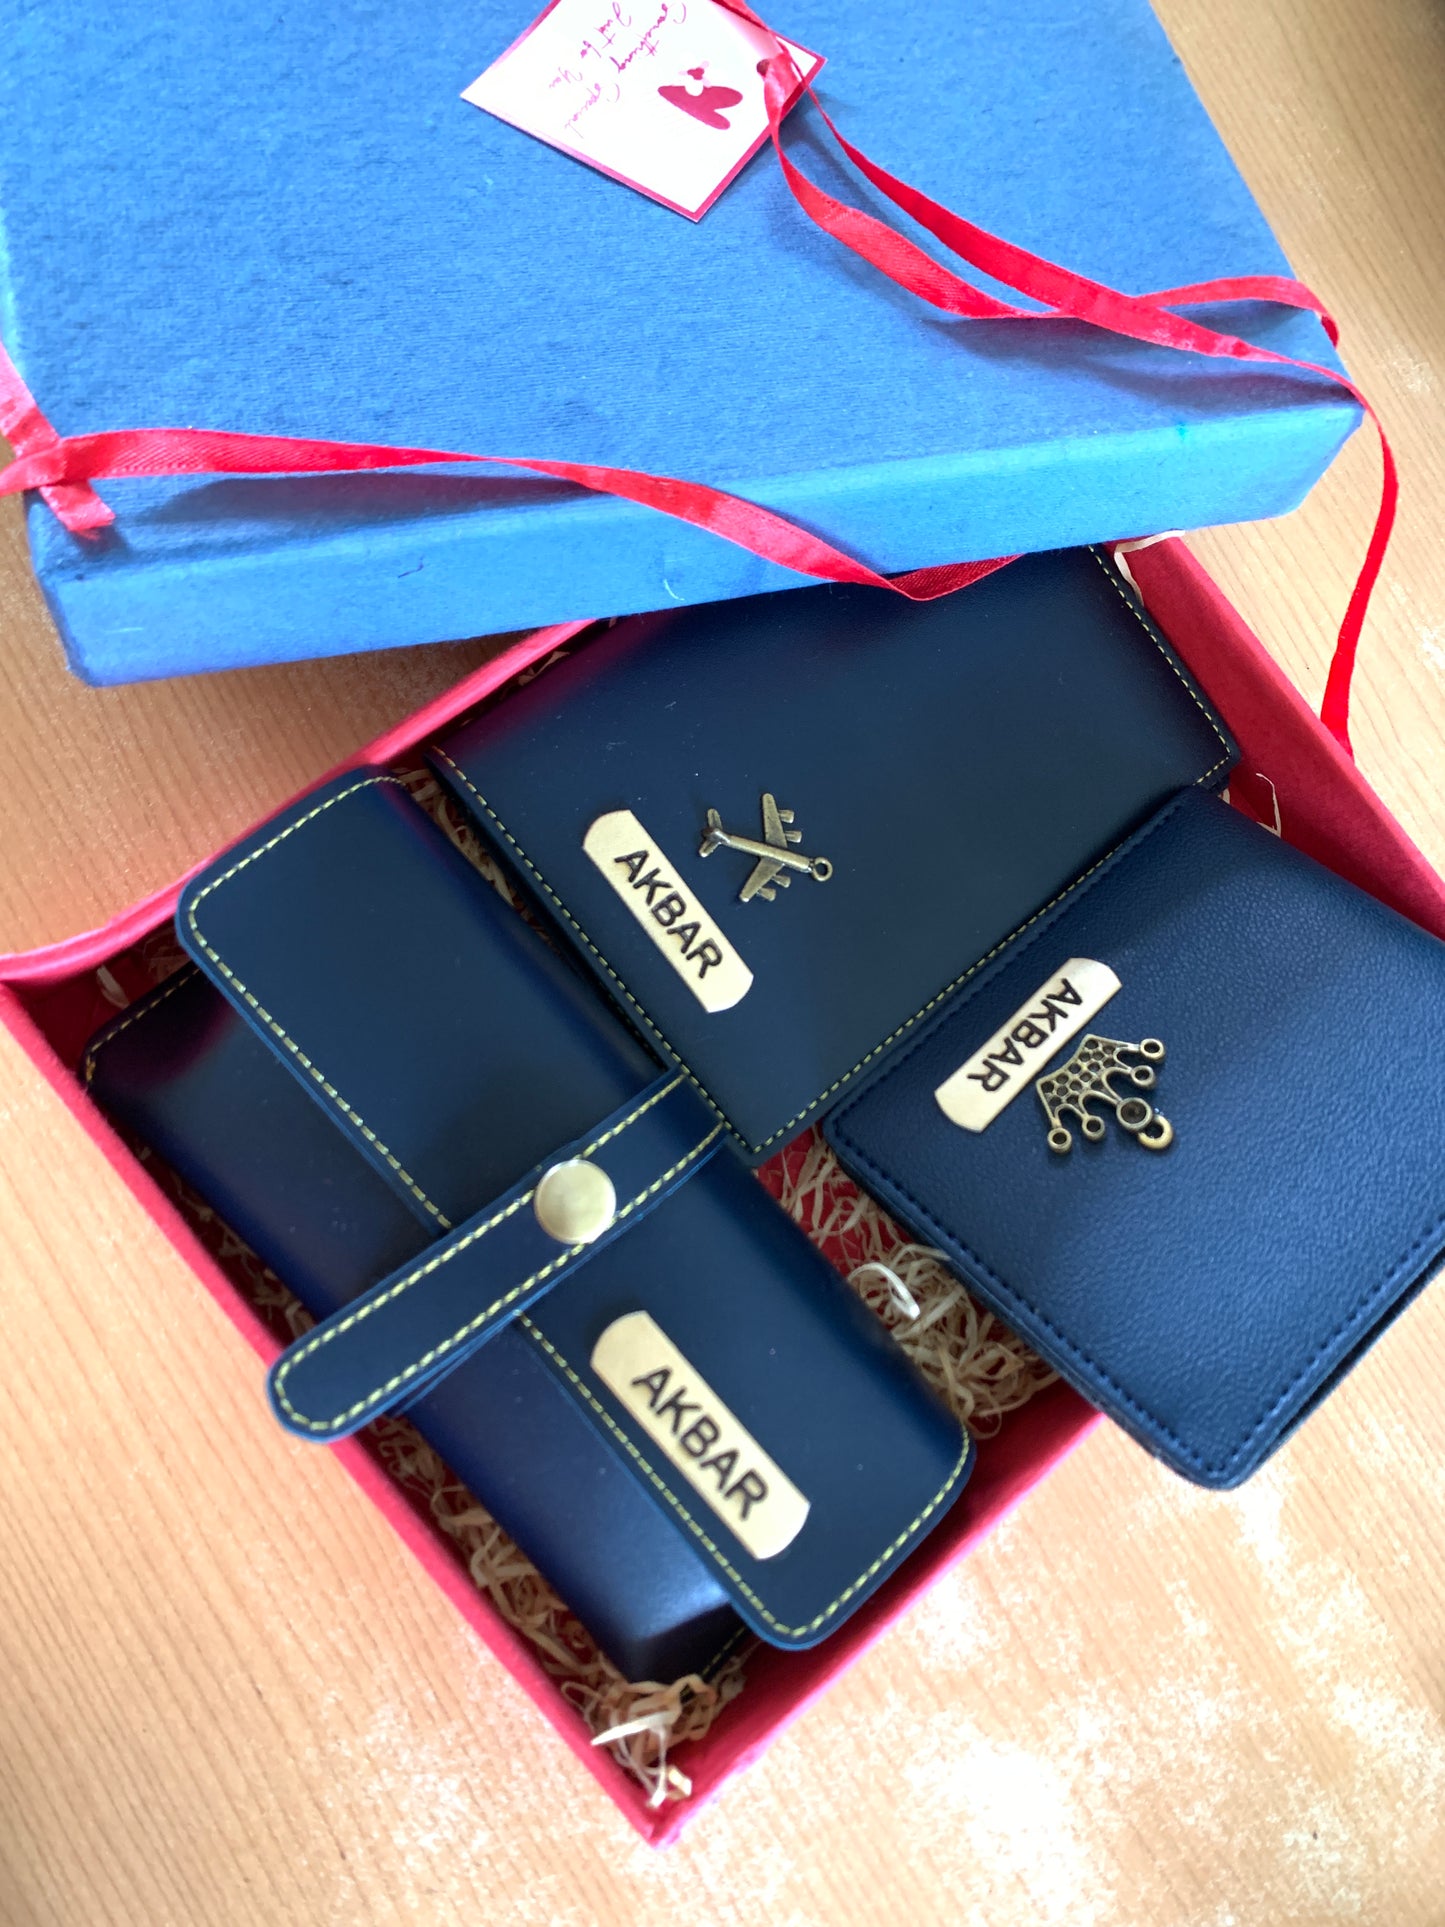 Wallet + Passport Cover + Sunglasses cover - Personalised Gift Set Men (in blue)